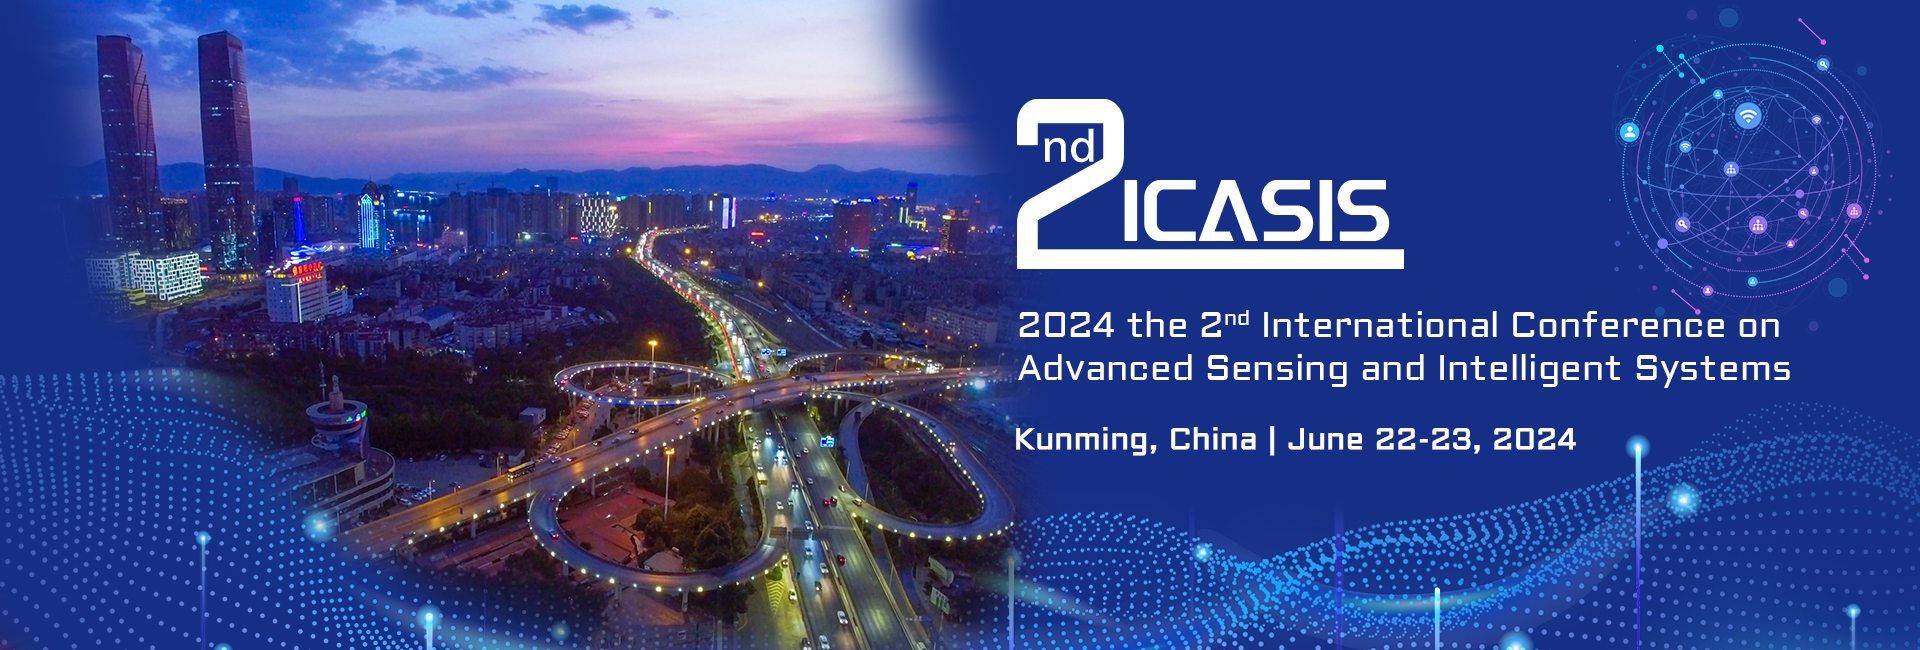 2024 the 2nd International Conference on Advanced Sensing and Intelligent Systems 